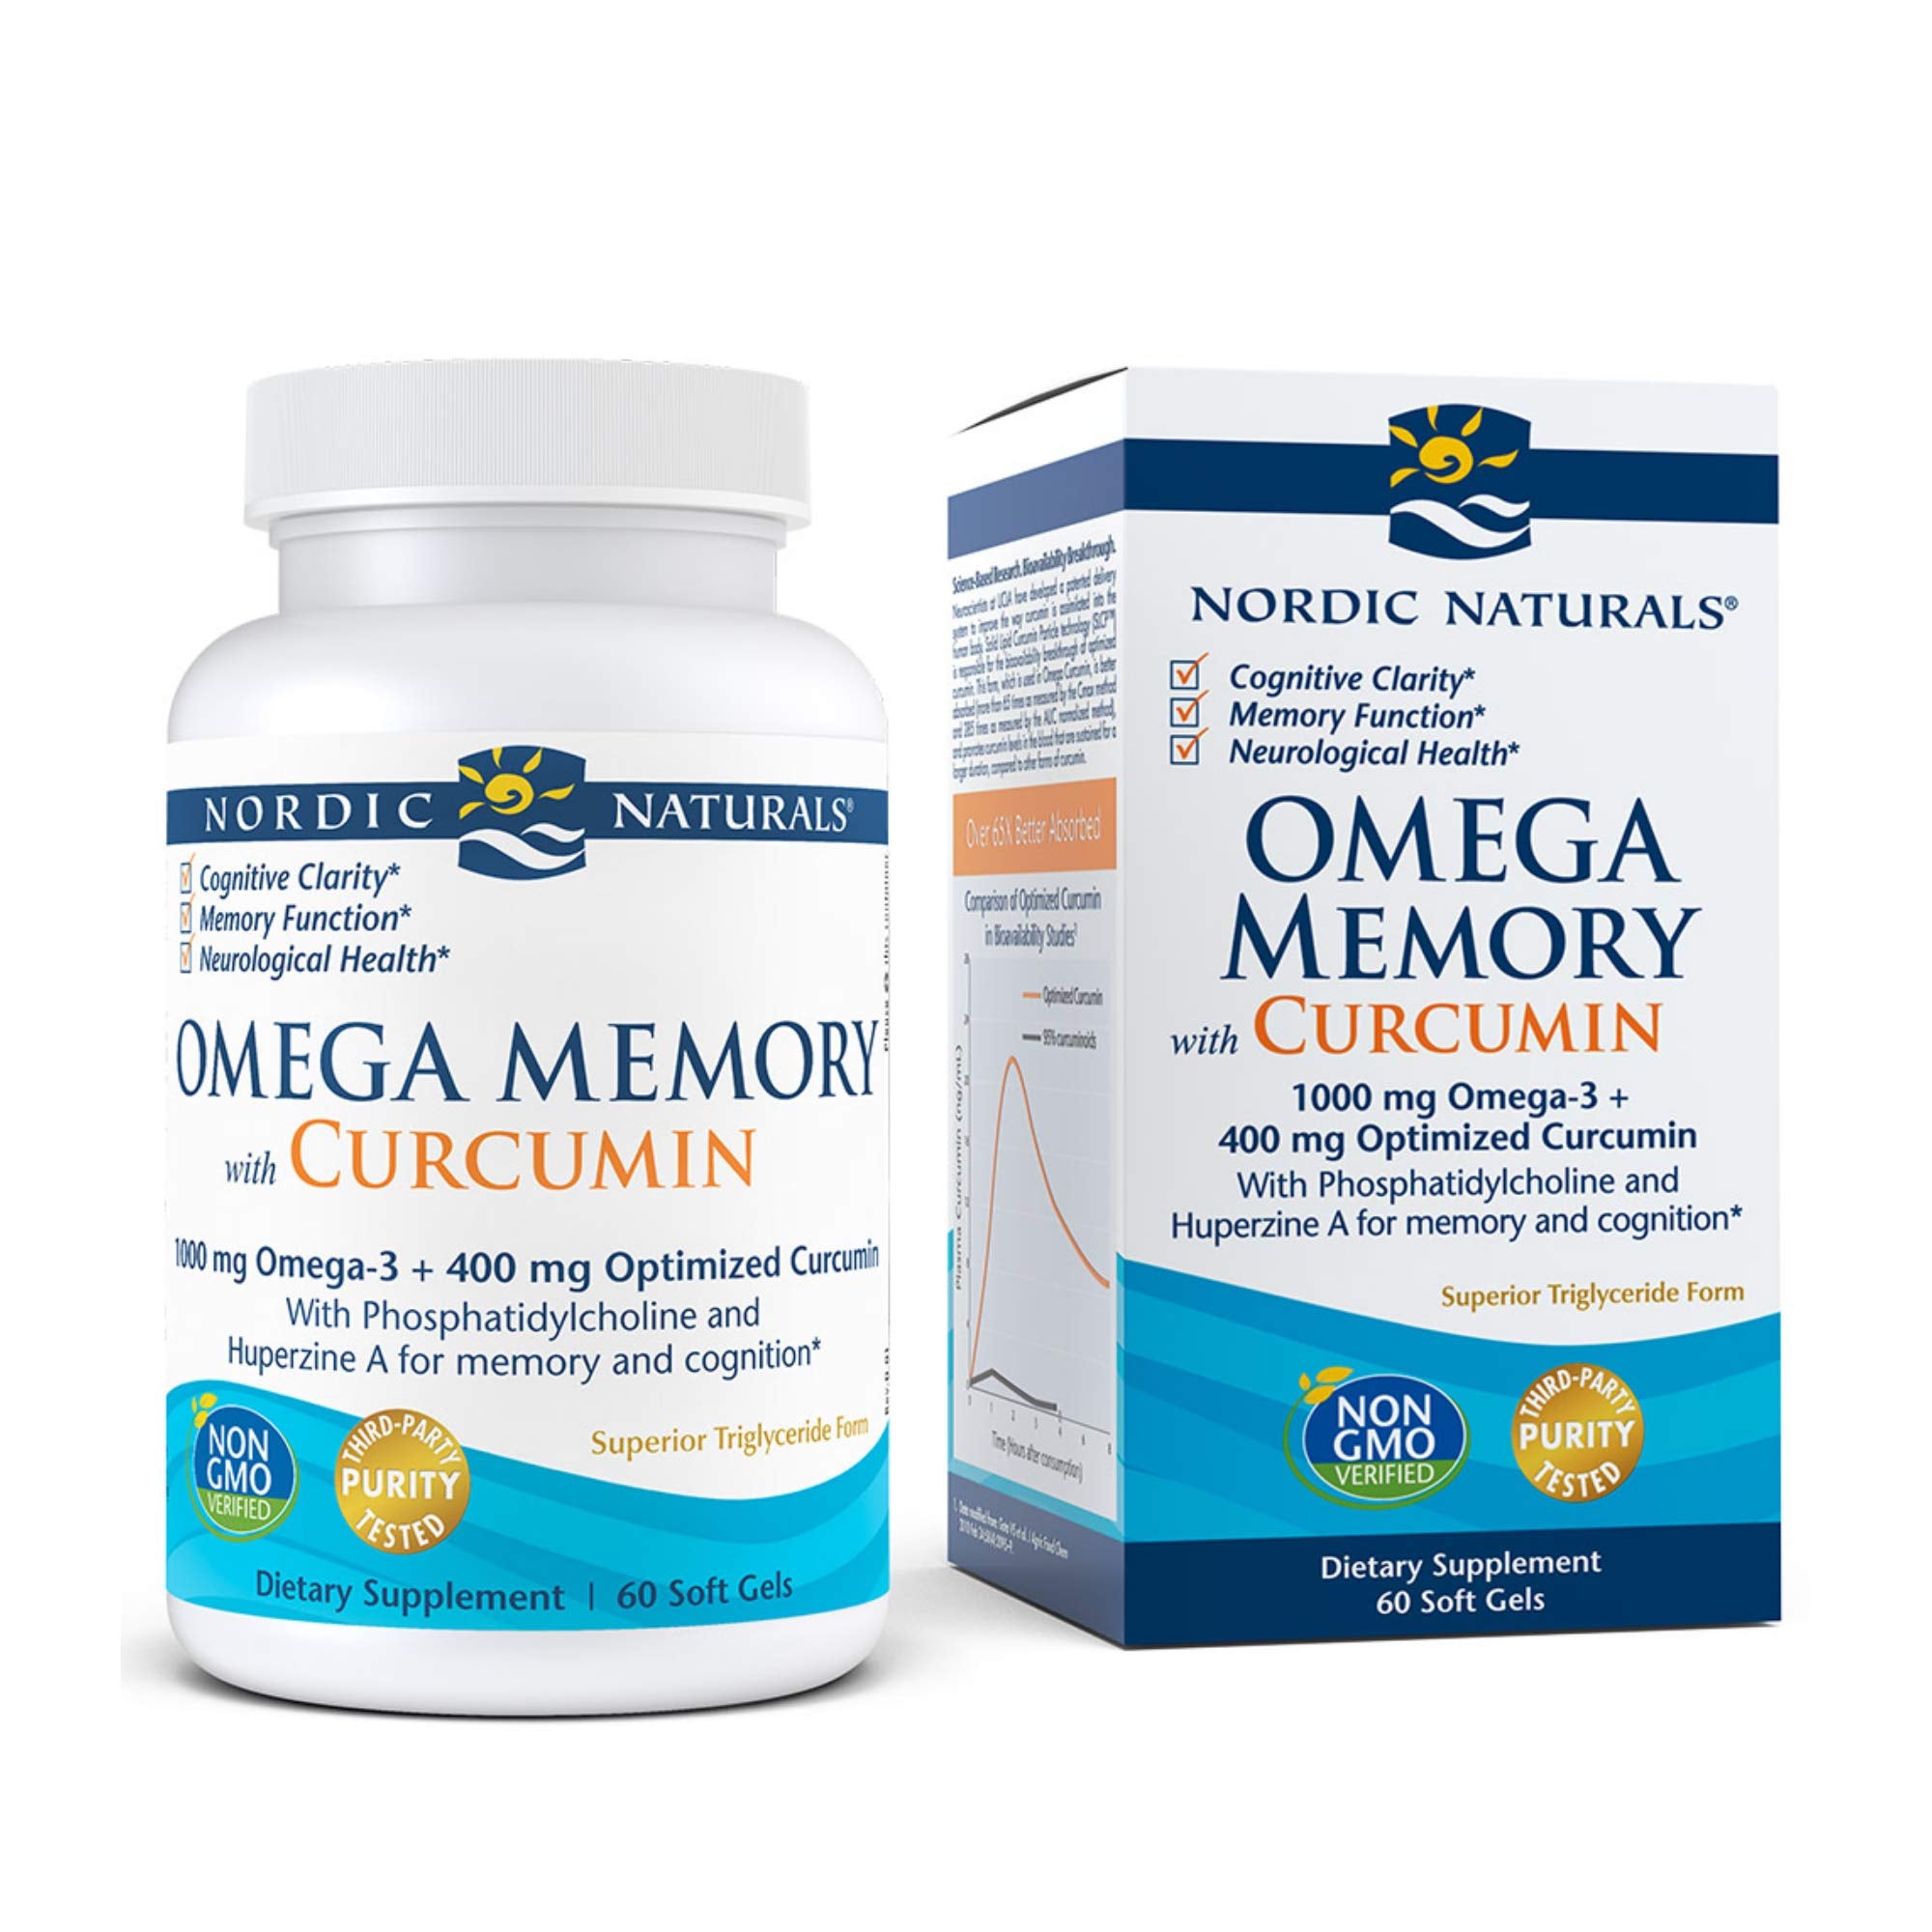 Nordic Naturals Omega Memory Curcumin - Supports Optimal Brain Health, Cognitive Clarity, Memory Function, 60 Soft Gels